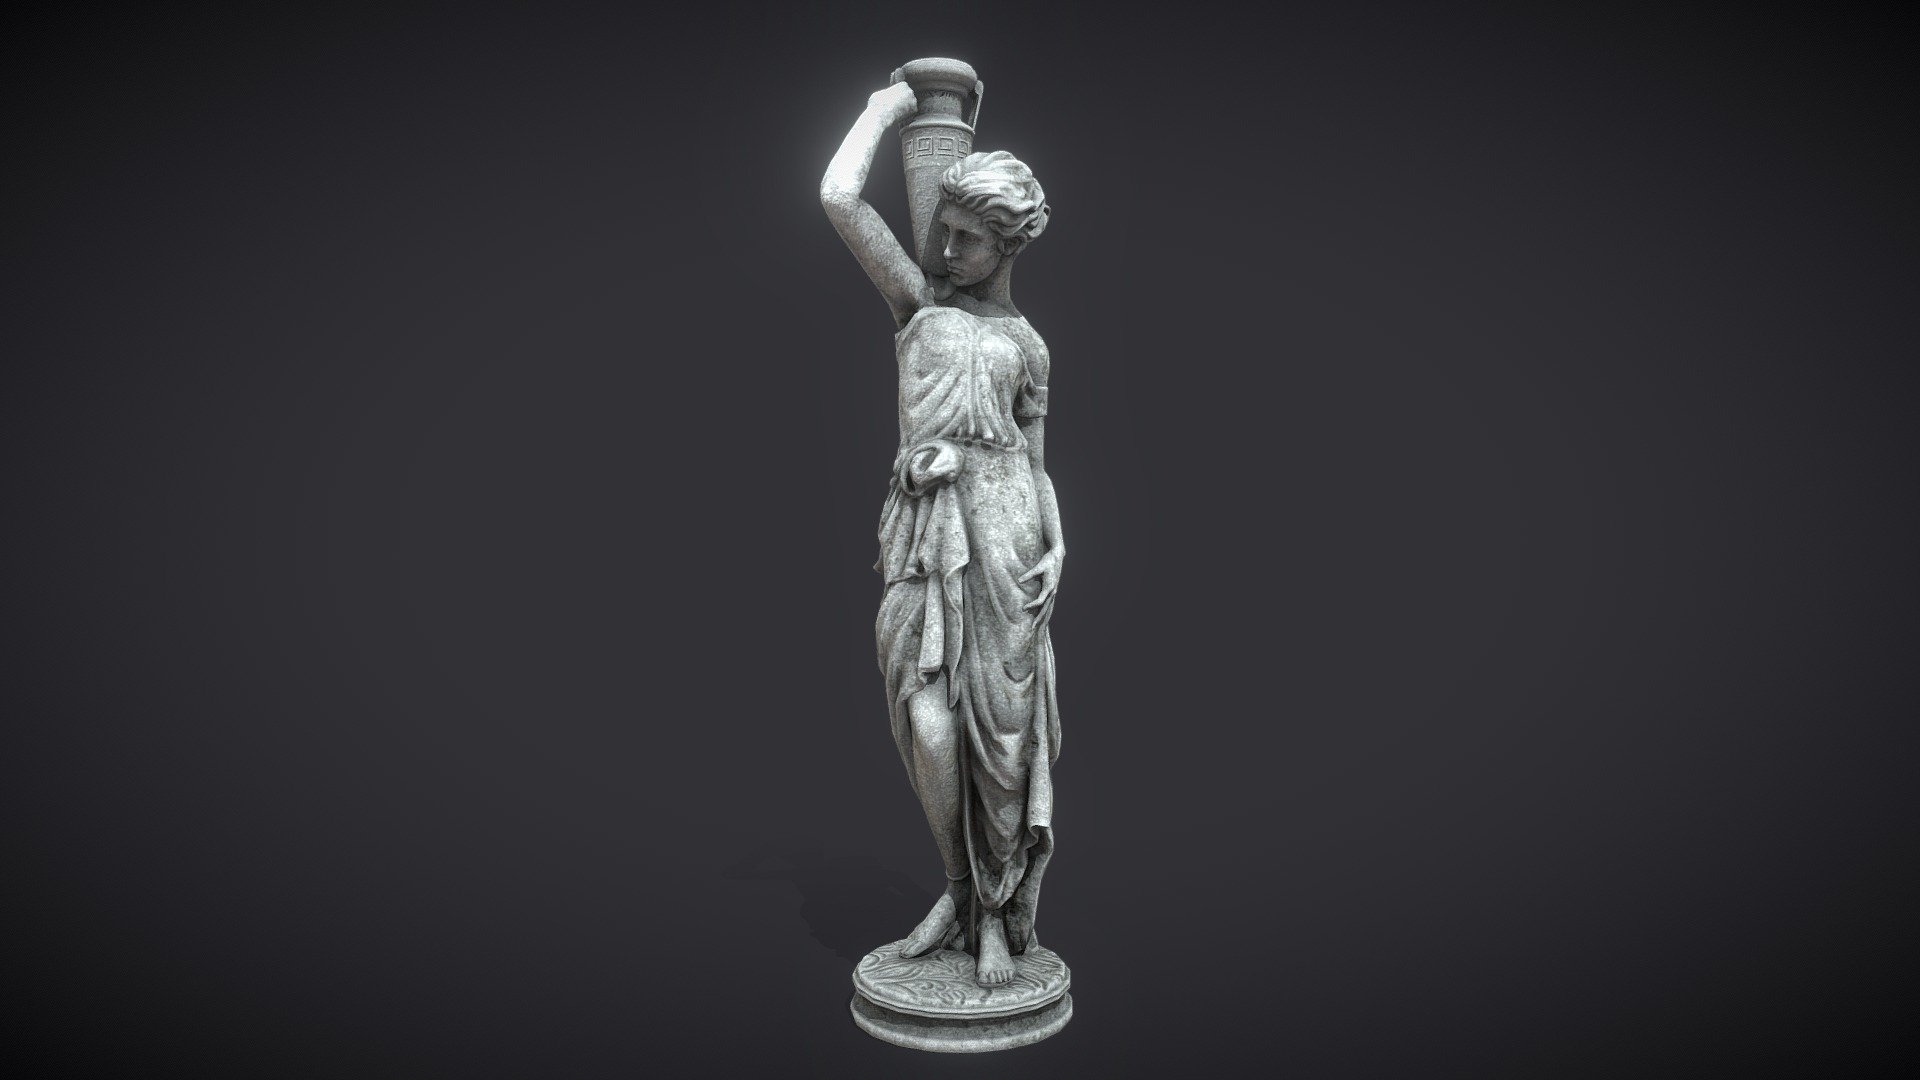 Greek Villa - Asset Pack





Greek Statue

..................................

OVA’s flagship software, StellarX, allows those with no programming or coding knowledge to place 3D goods and create immersive experiences through simple drag-and-drop actions. 

Storytelling, which involves a series of interactions, sequences, and triggers are easily created through OVA’s patent-pending visual scripting tool. 

..................................

**Download StellarX on the Meta Quest Store: oculus.com/experiences/quest/8132958546745663
**

**Download StellarX on Steam: store.steampowered.com/app/1214640/StellarX
**

Have a bigger immersive project in mind? Get in touch with us! 



StellarX on LinkedIn: linkedin.com/showcase/stellarx-by-ova

Join the StellarX Discord server! 

..................................

StellarX© 2022 - Greek Statue - Buy Royalty Free 3D model by StellarX 3d model